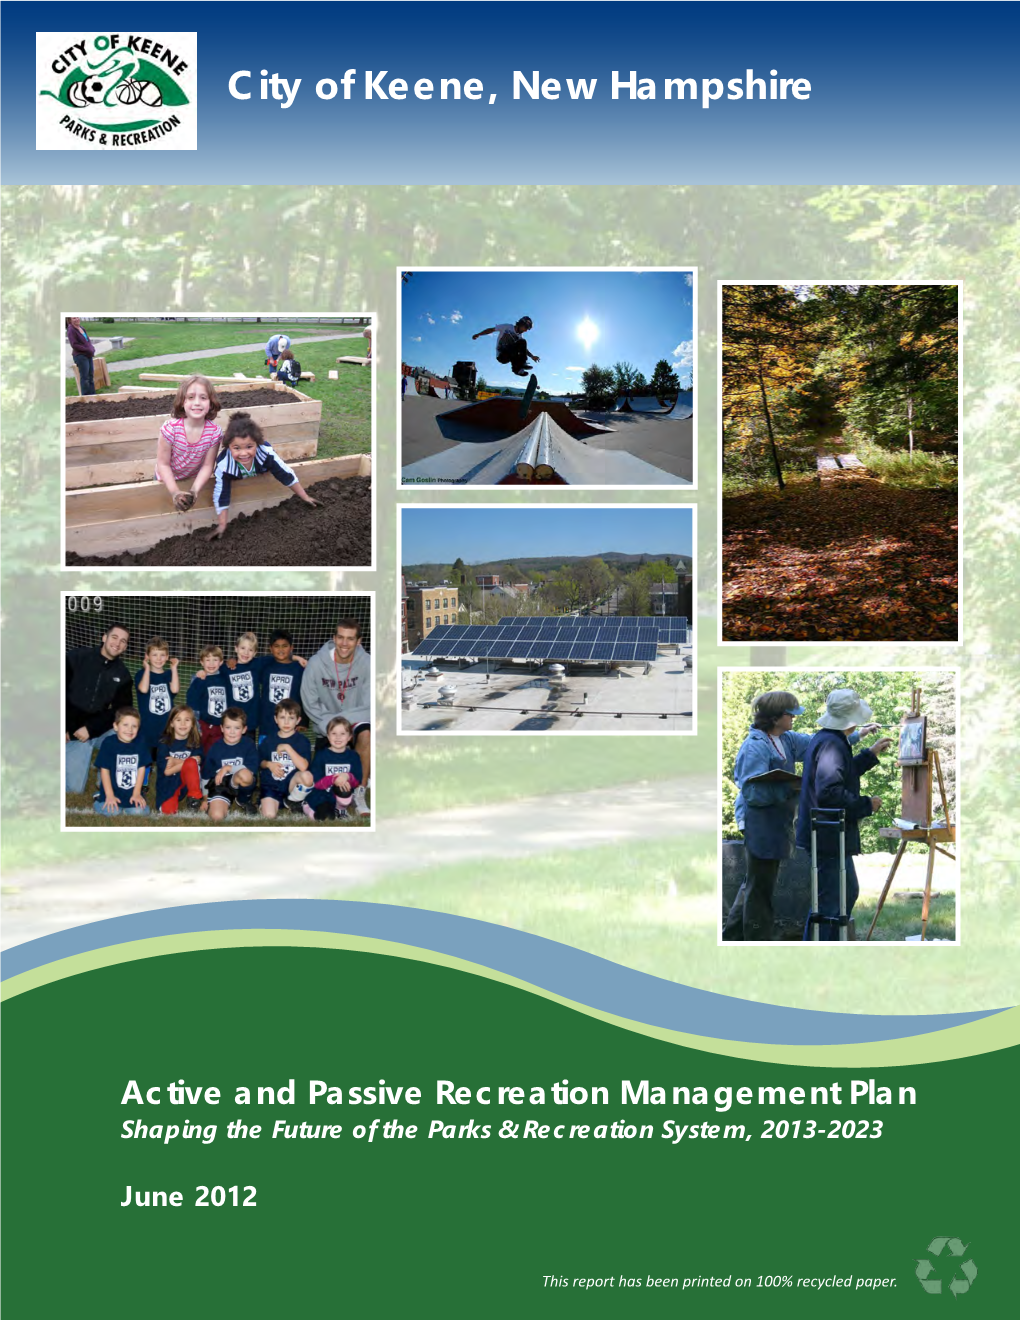 Active and Passive Recreation Management Plan Shaping the Future of the Parks & Recreation System, 2013-2023